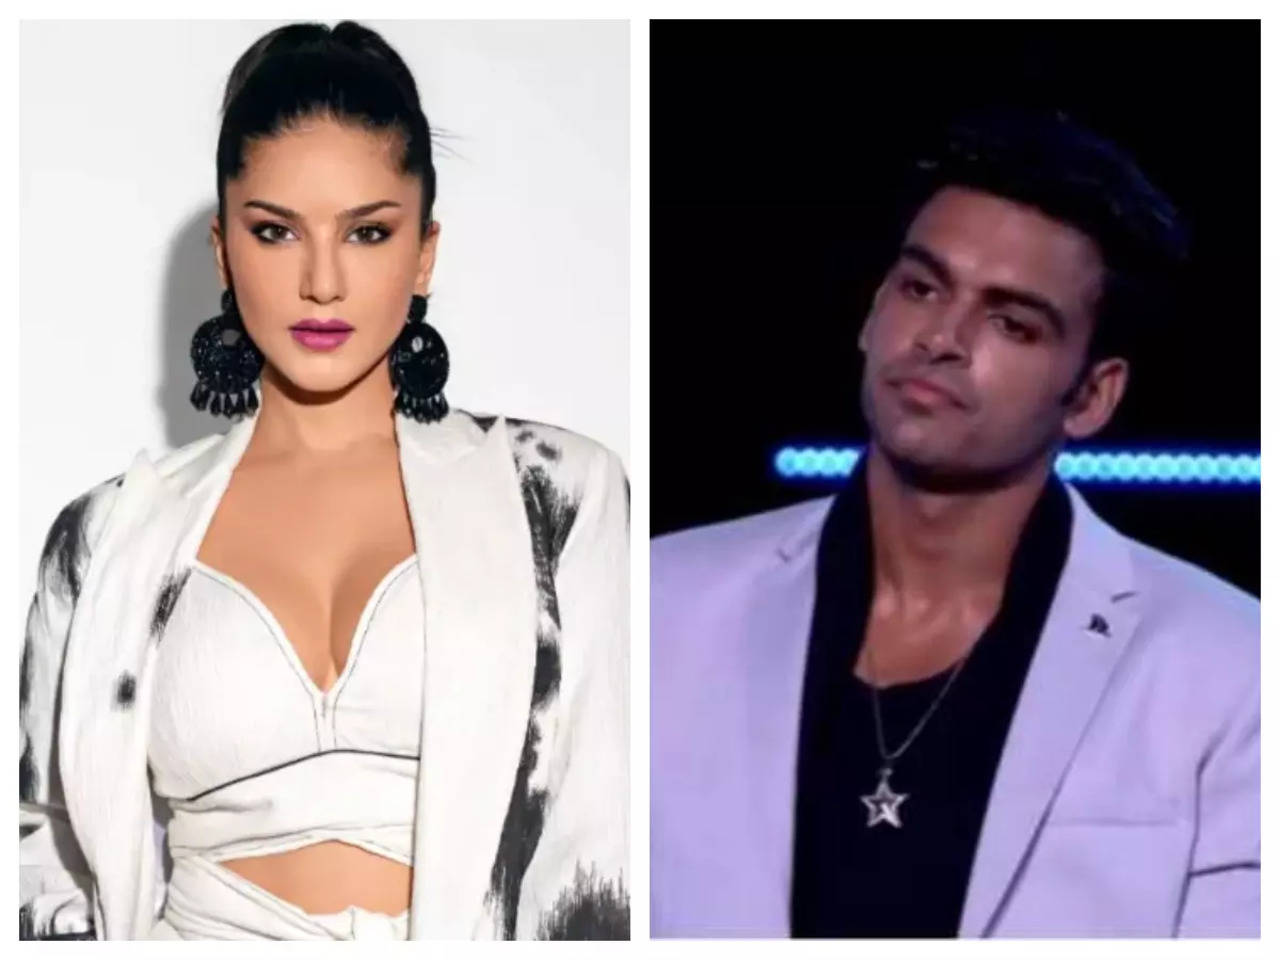 Sunny Leone urges Kashish Thakur to choose himself over love on Splitsvilla X4; shares her own struggle story to motivate pic